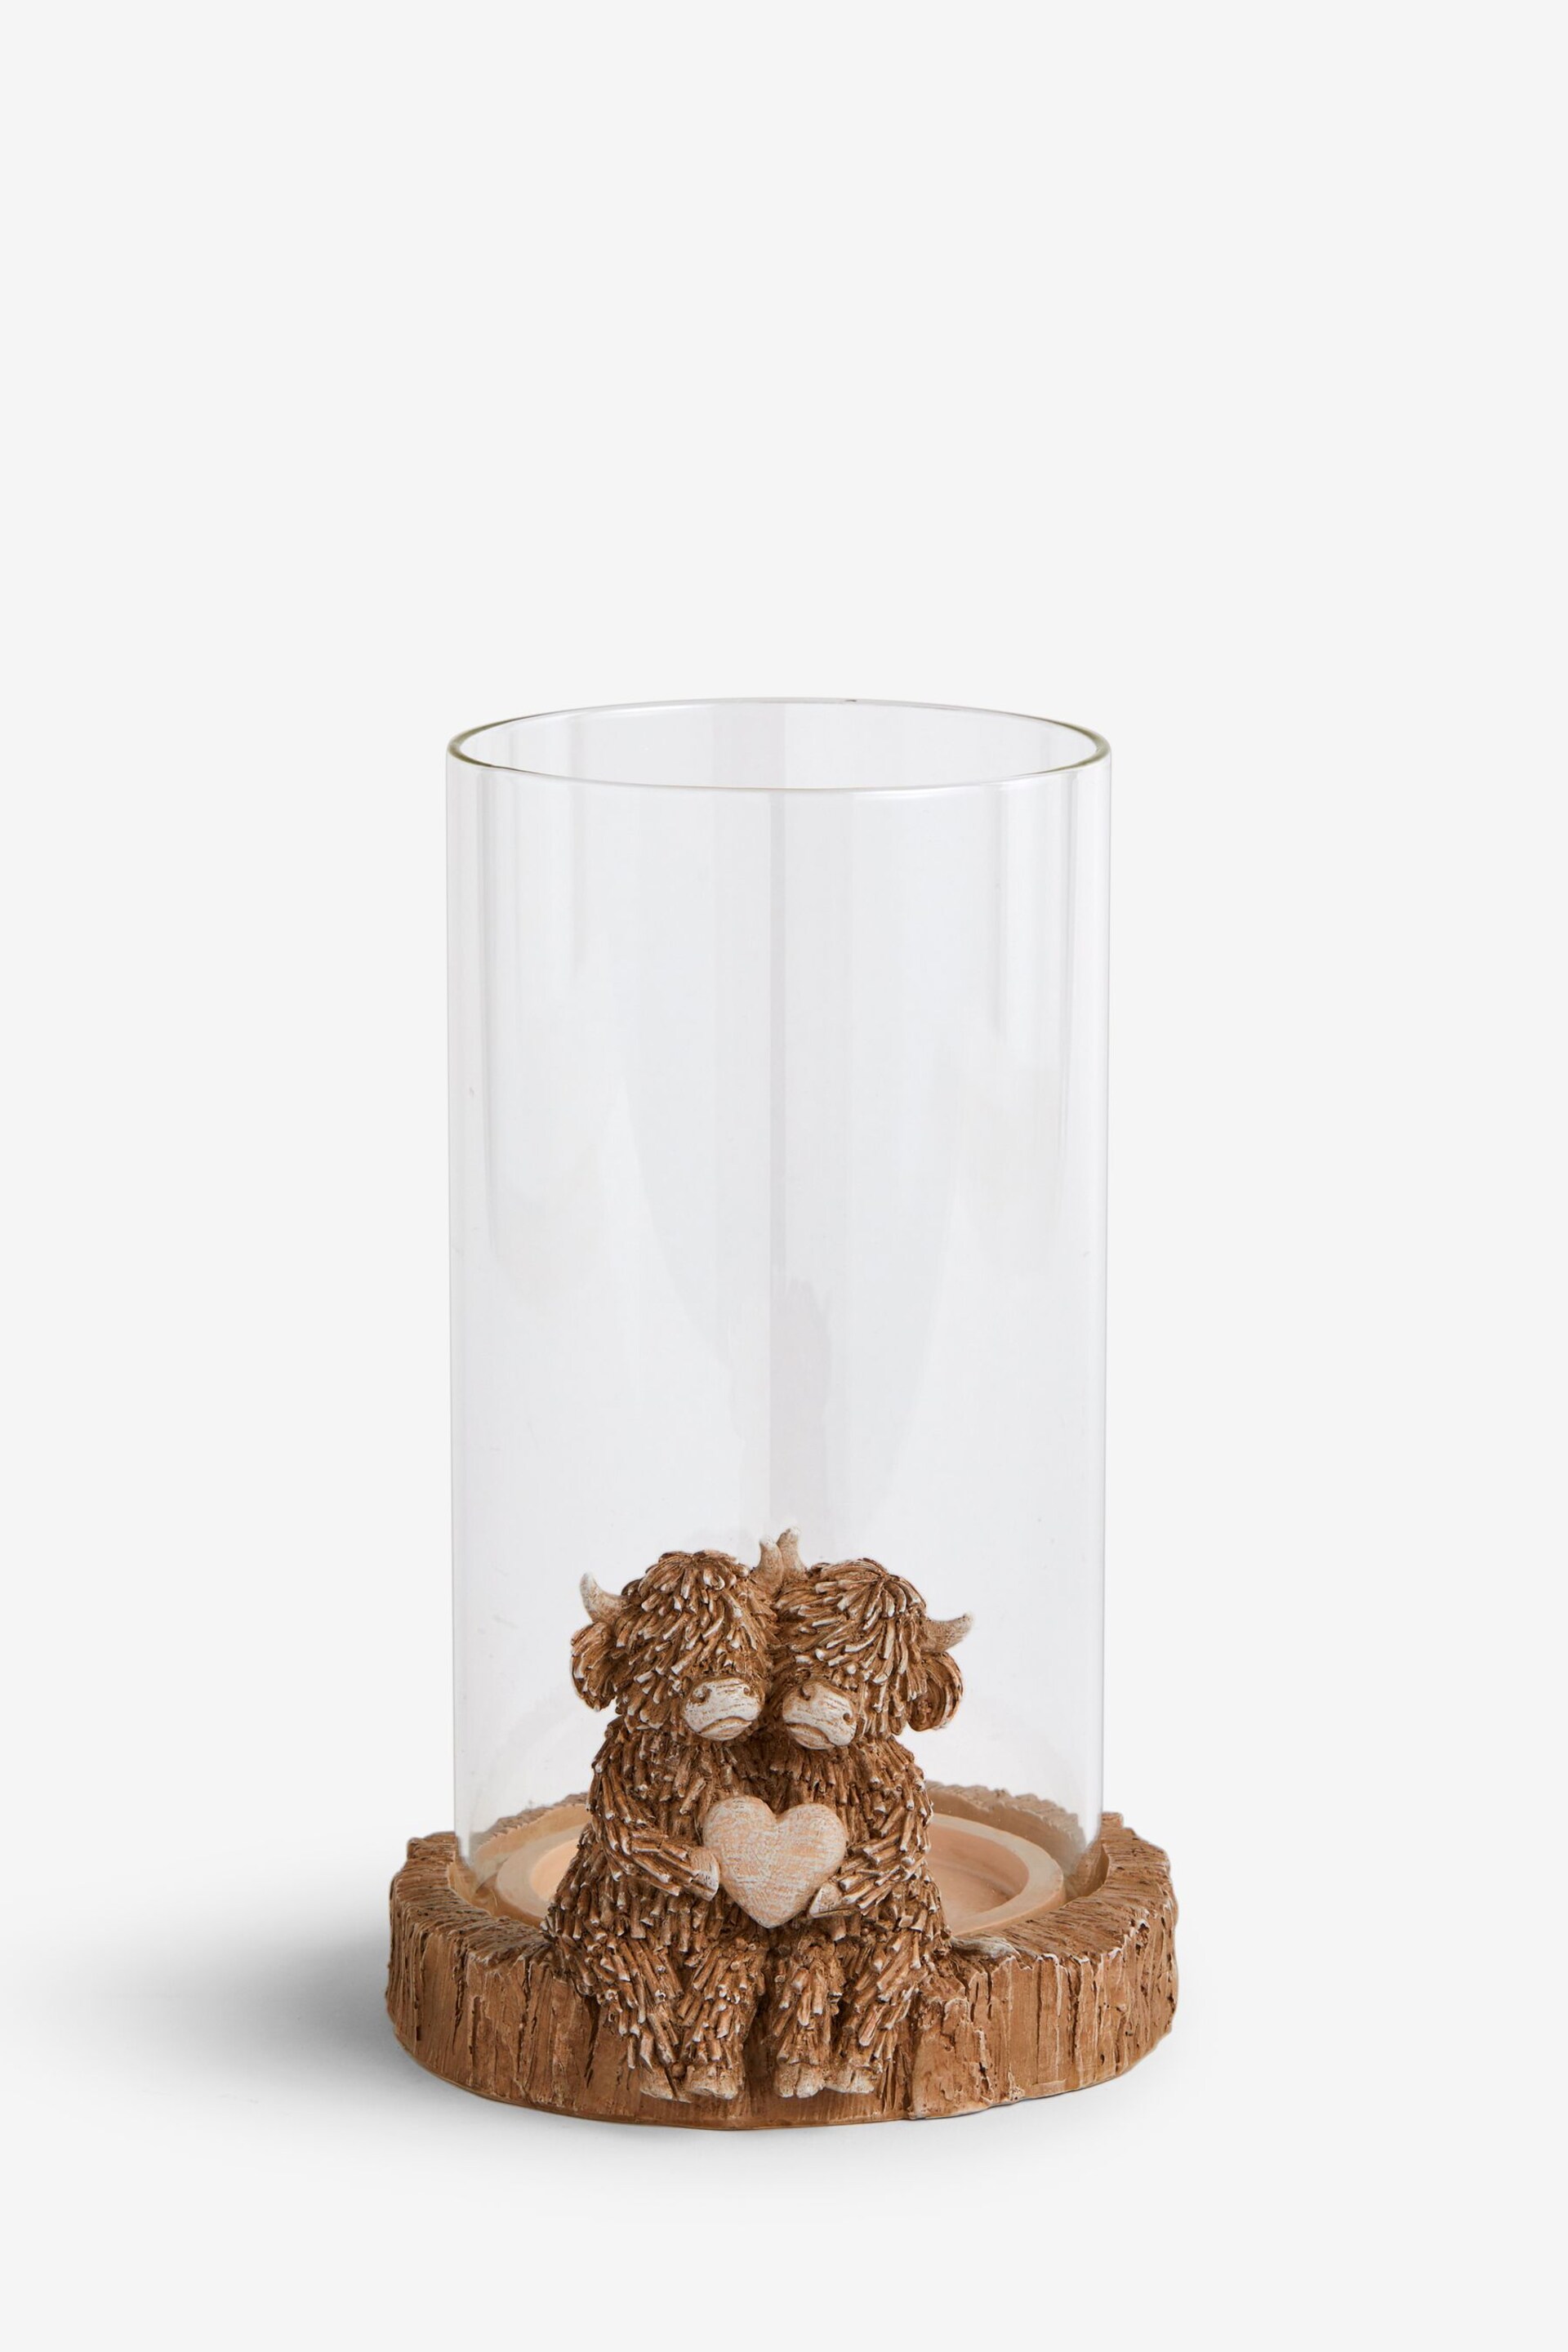 Natural Hamish The Highland Cow Hurricane Candle Holder - Image 4 of 5